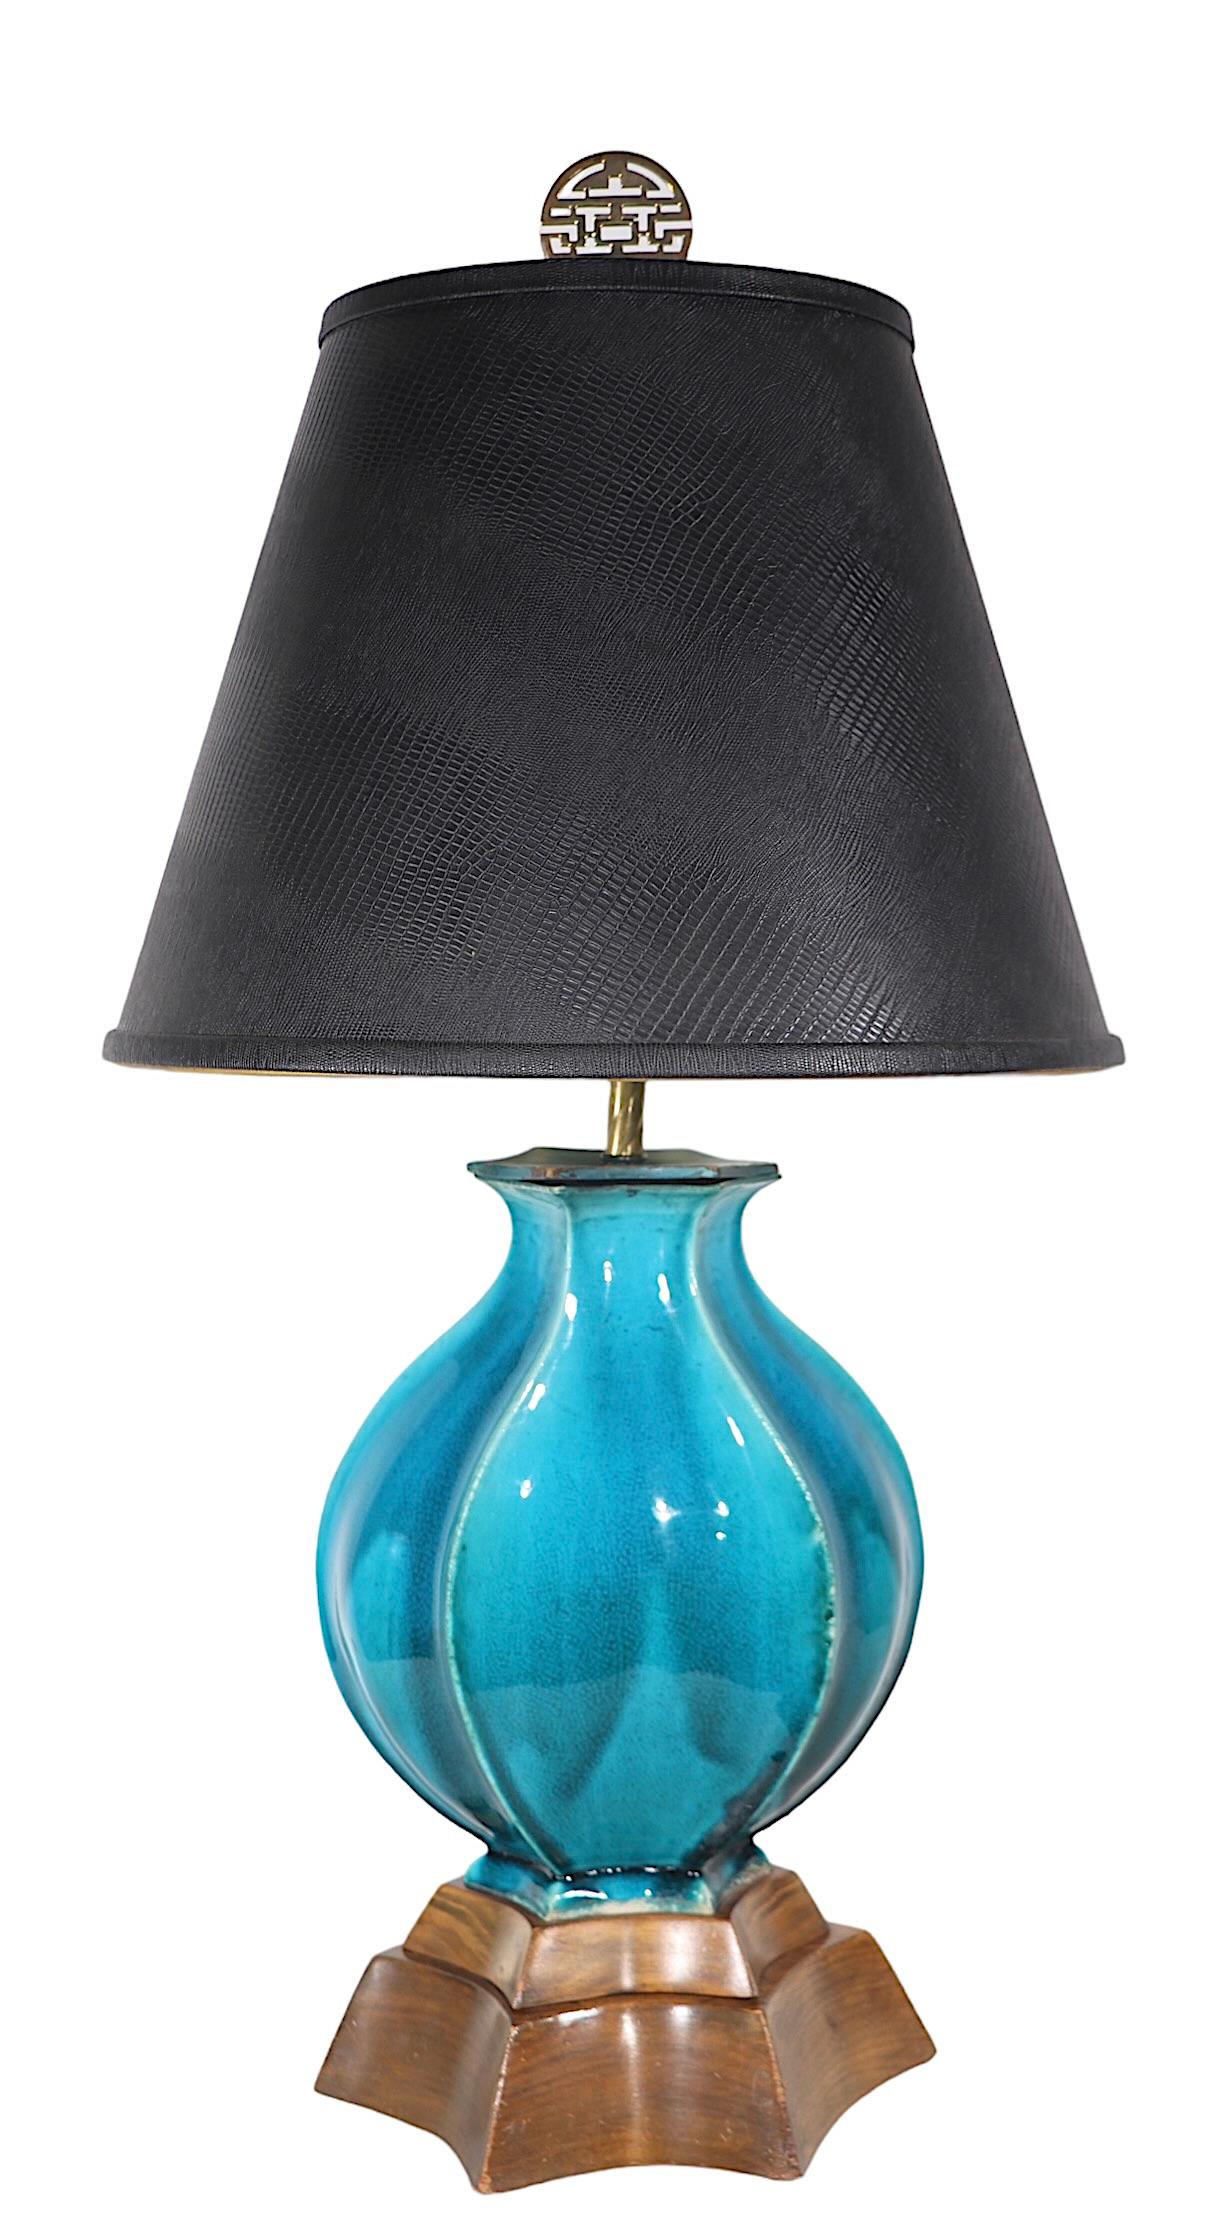 High Style Hollywood Regency style table lamp having a bulbous  six sided ceramic vase body, mounted on a stylized custom wood plinth base. The lamp was executed in a high gloss cerulean blue crackle finish, the two tier plinth base mirrors the form